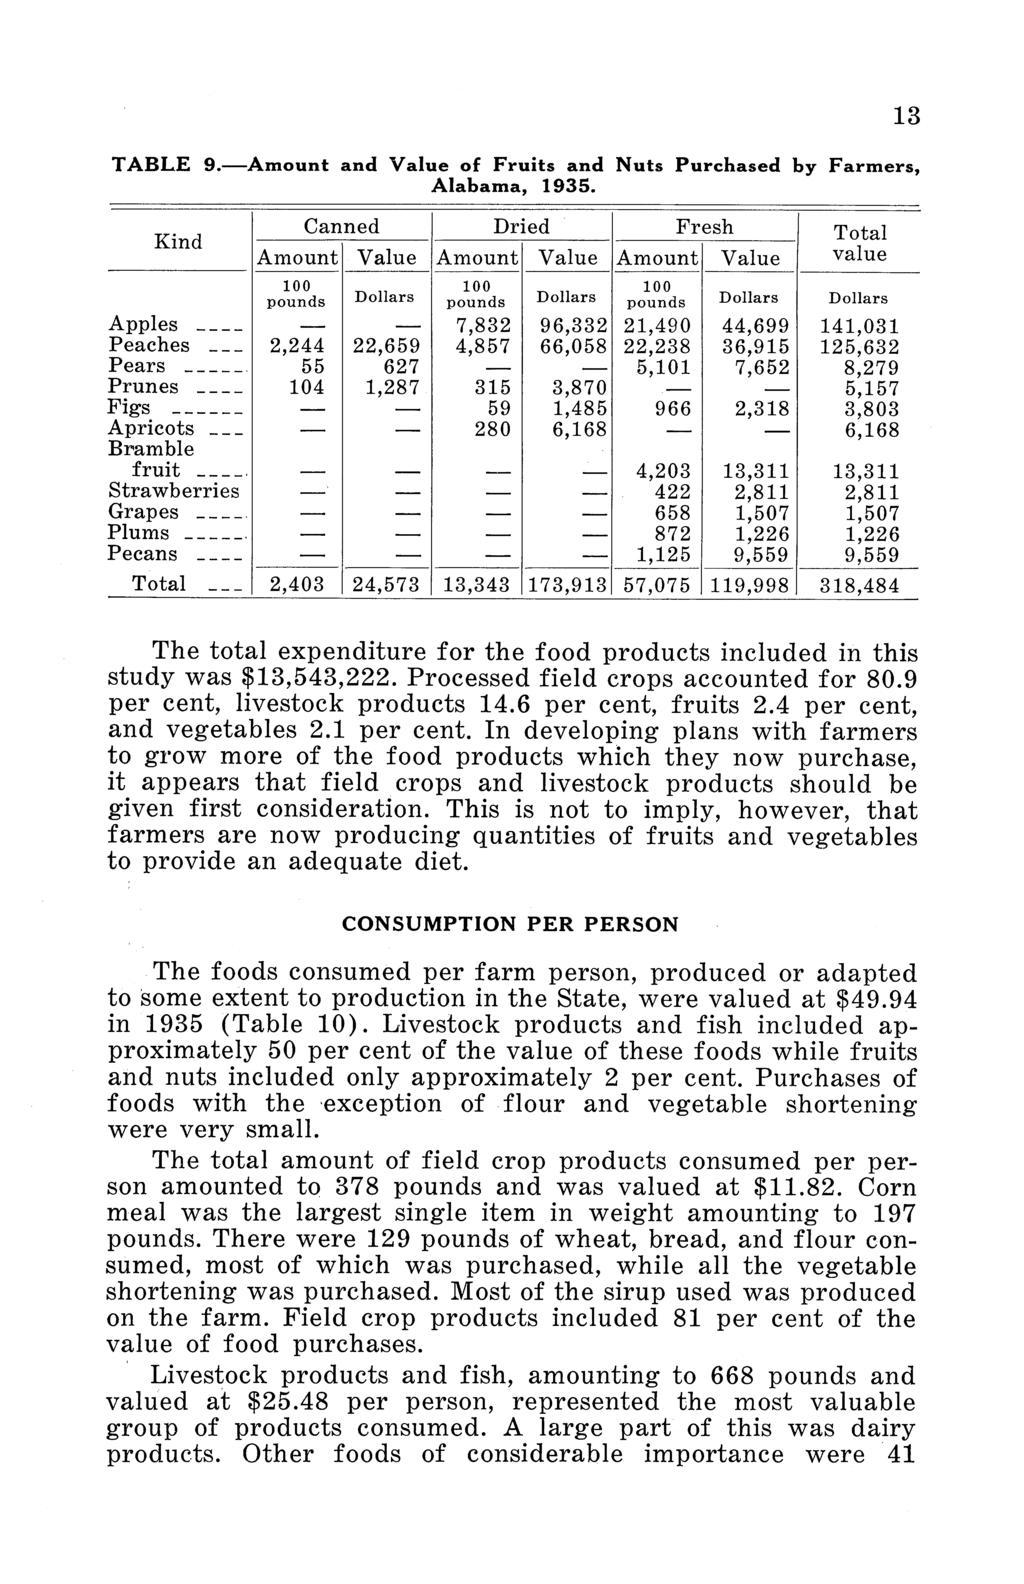 TABLE 9.-Amount and Value of Fruits and Nuts Purchased by Farmers, Alabama, 1935.